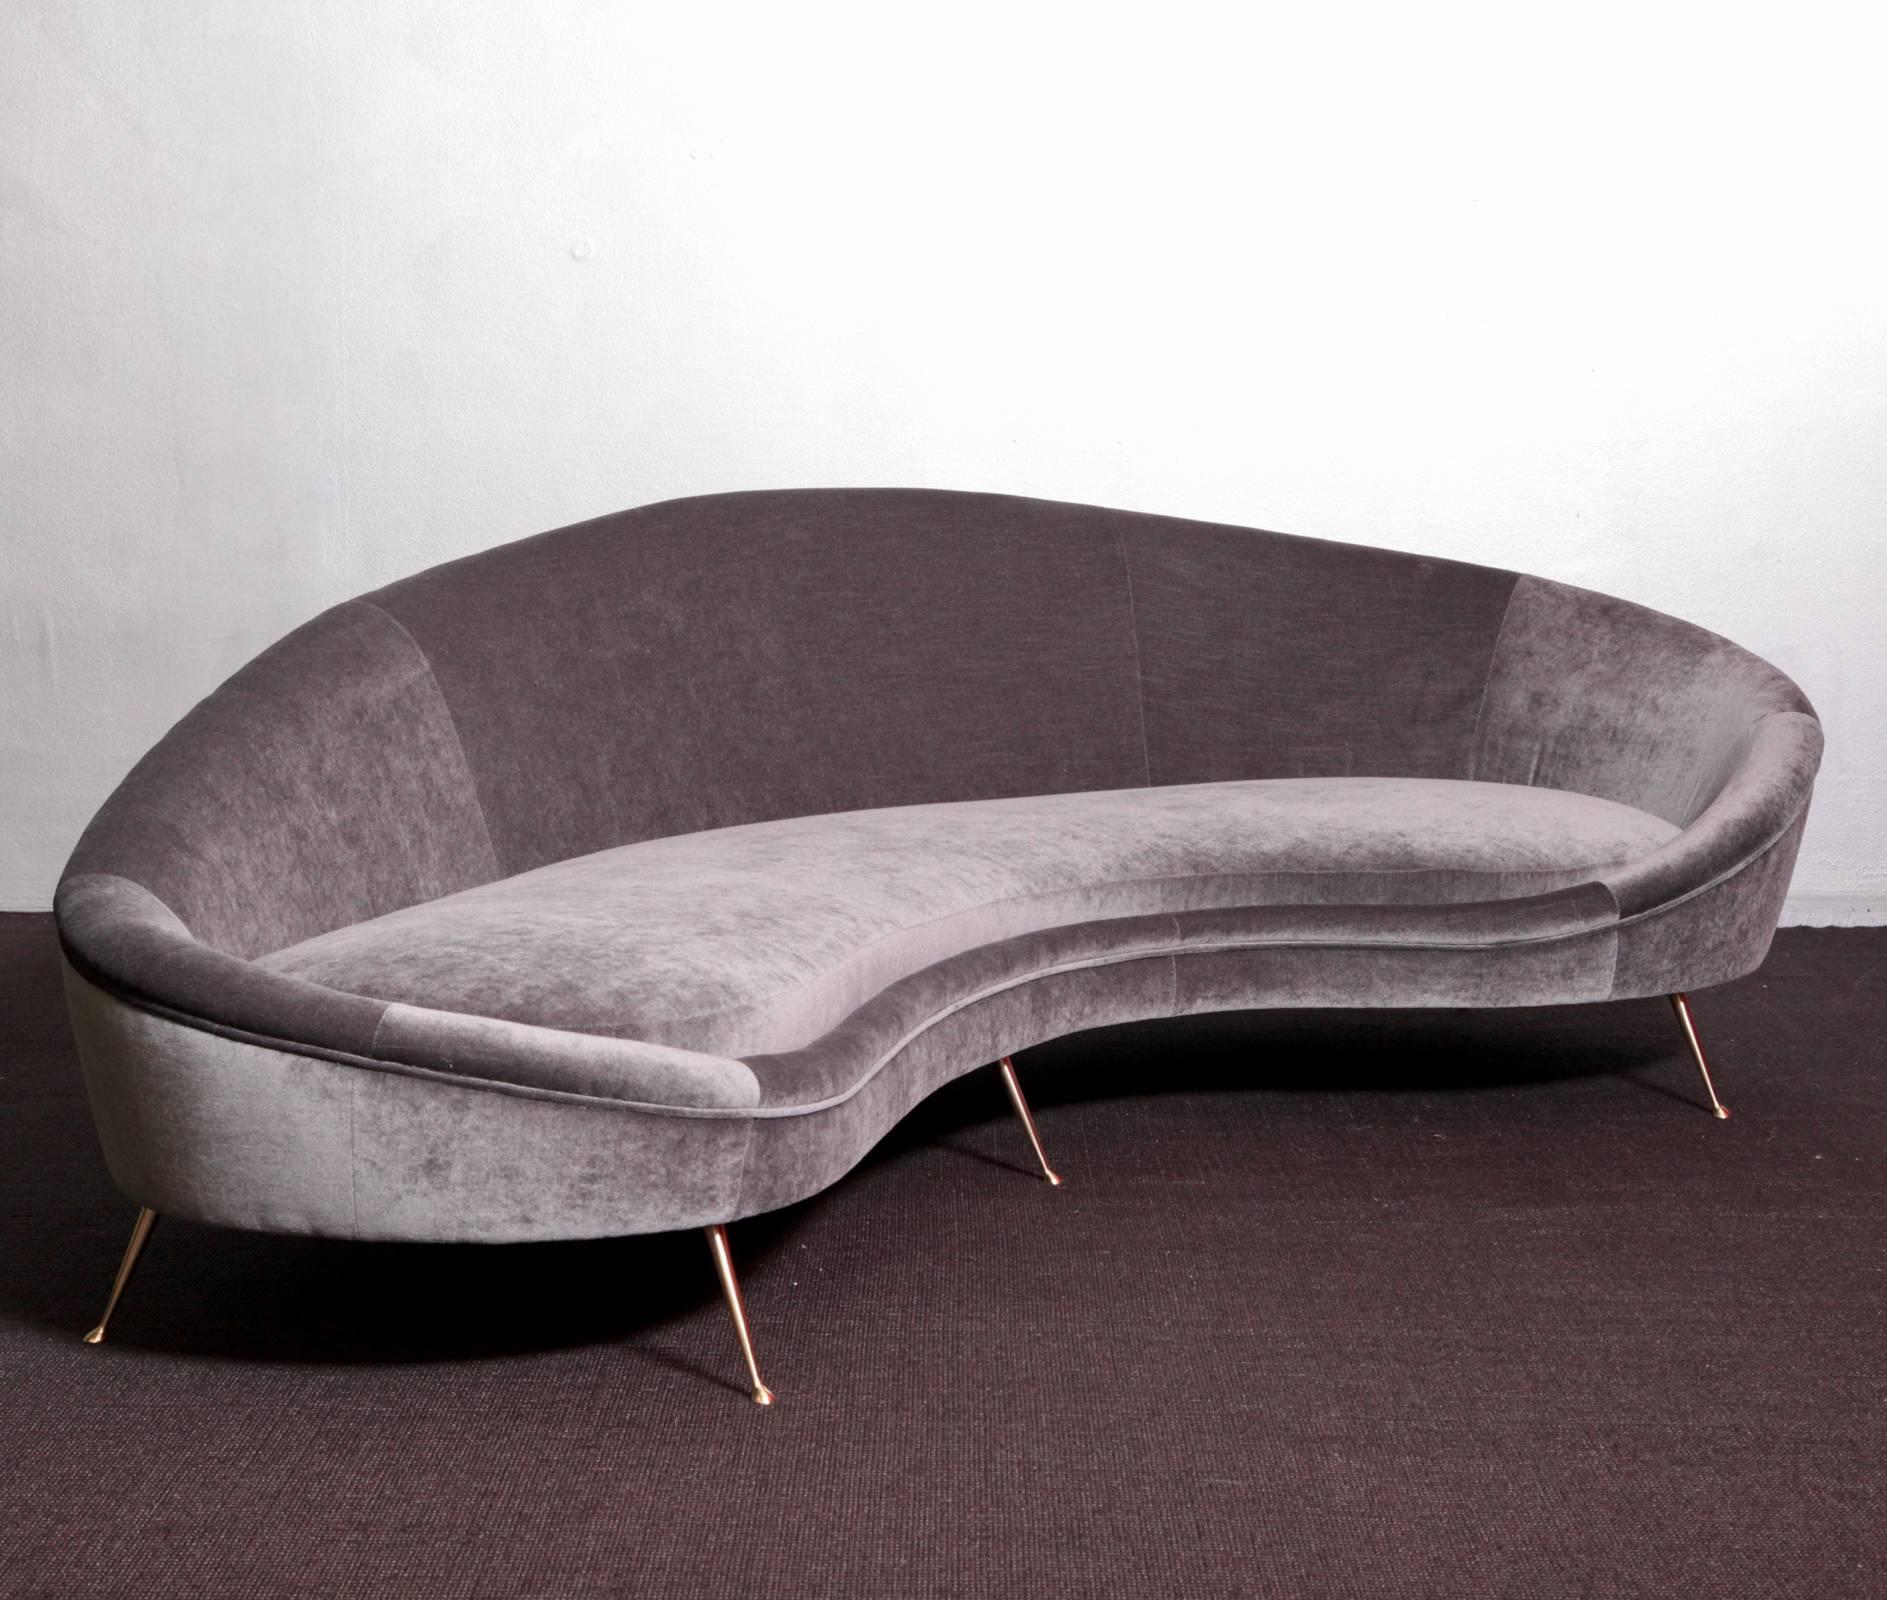 Wonderful huge curved sofa in the manner of Ico Parisi. The sofa is newly upholstered in velvet and it's in a very good condition. The sofa is a real eye catcher in each living room or lobby. The upholstery ist done hard so you don't bog in the